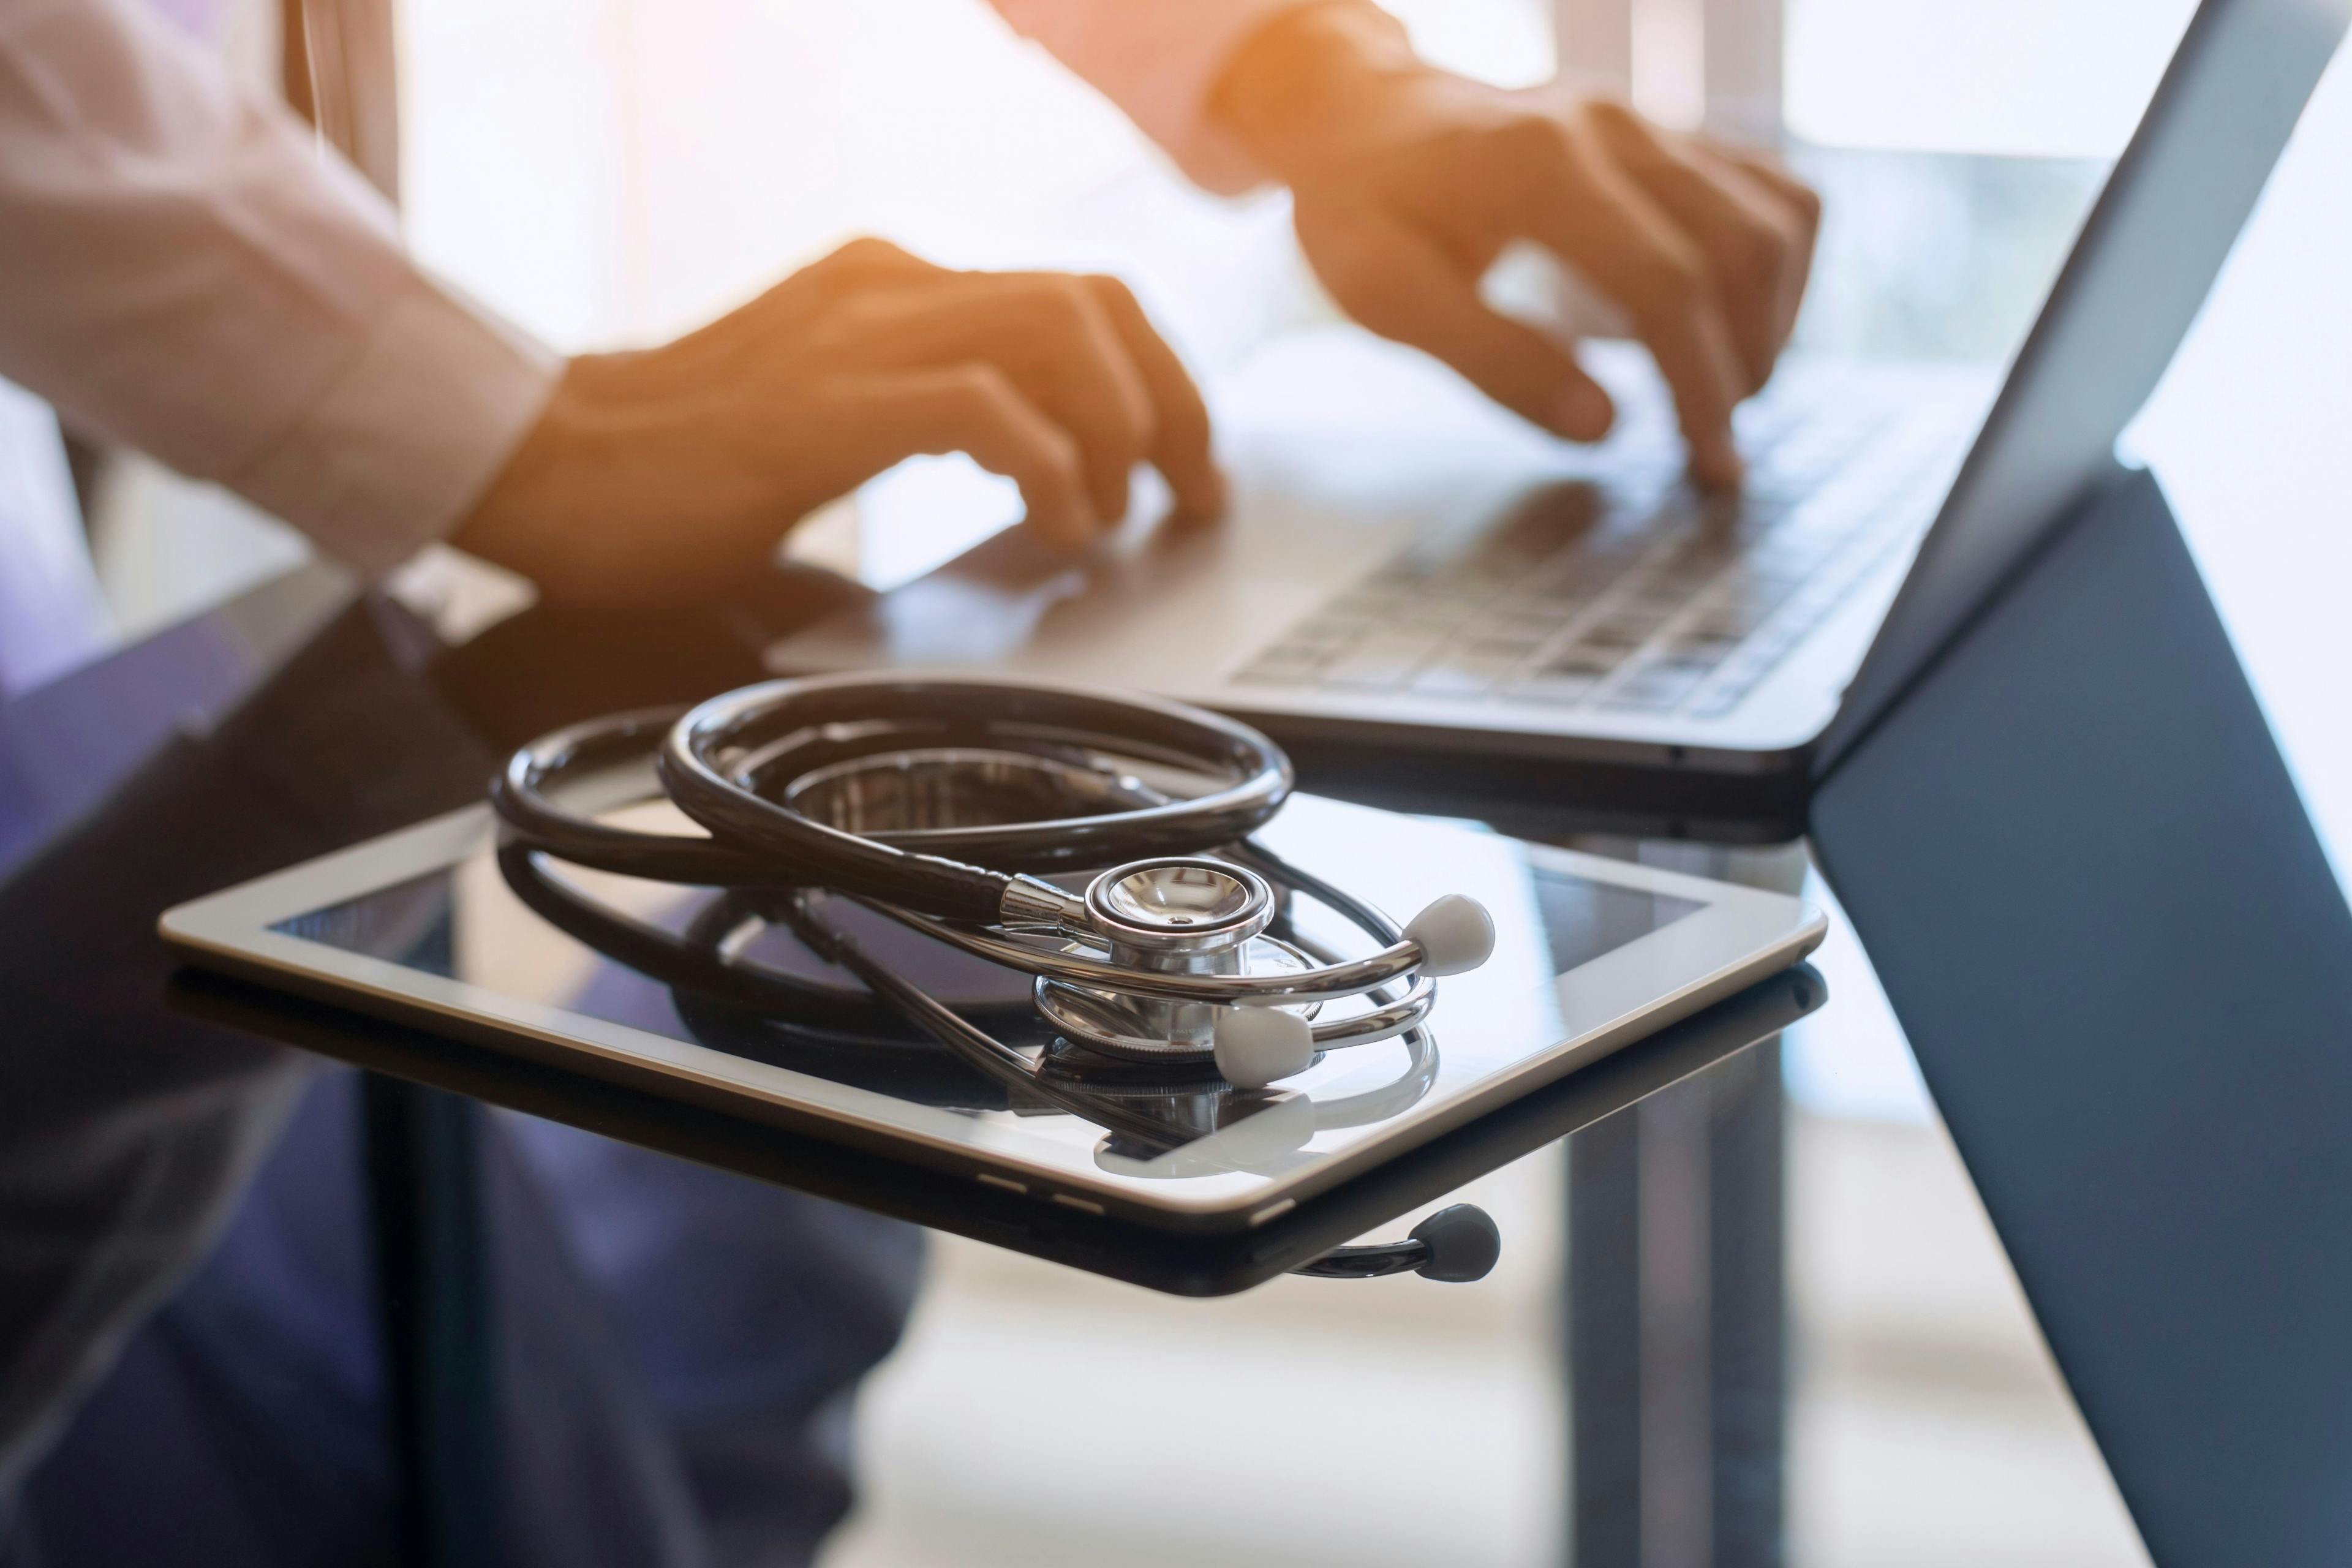 Telehealth with laptop, tablet, and stethoscope | Image credit: NIKCOA - stock.adobe.com